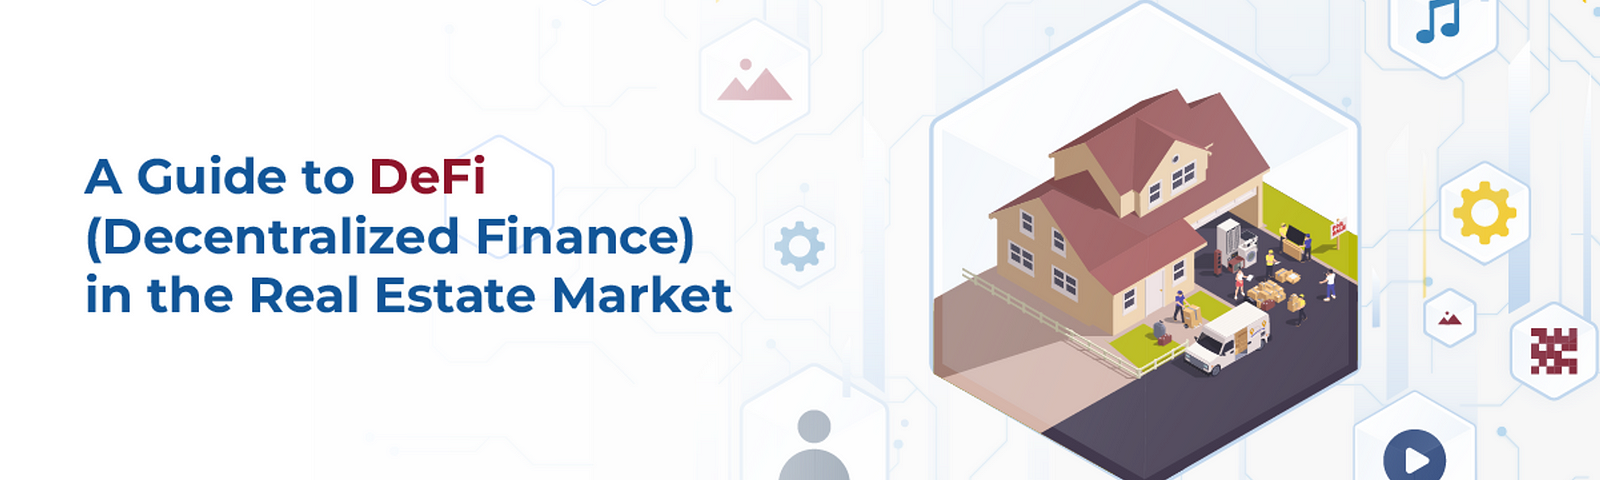 A Guide to DeFi (Decentralized Finance) in the Real Estate Market